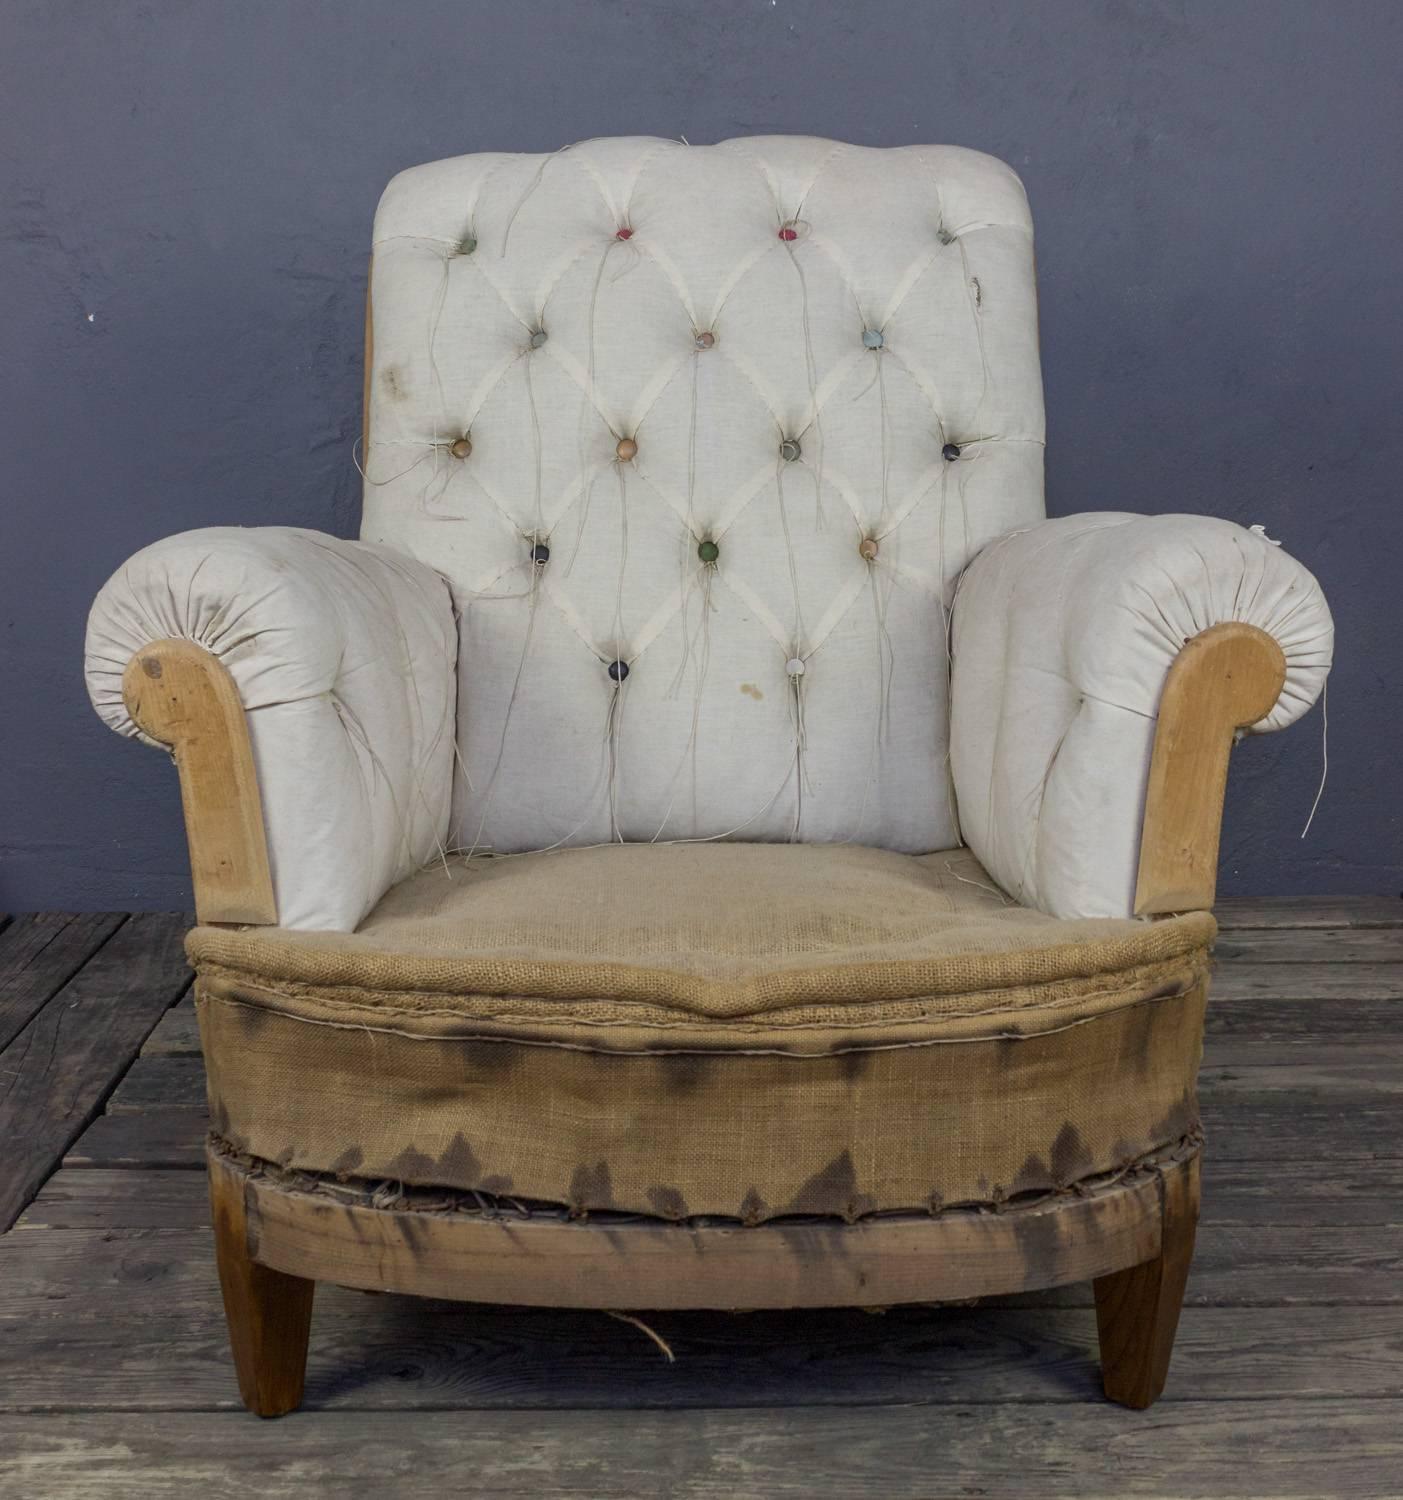 French tufted armchair with matching ottoman. Sold as is, upholstery available, price upon request. 

Ottoman measurements: 23